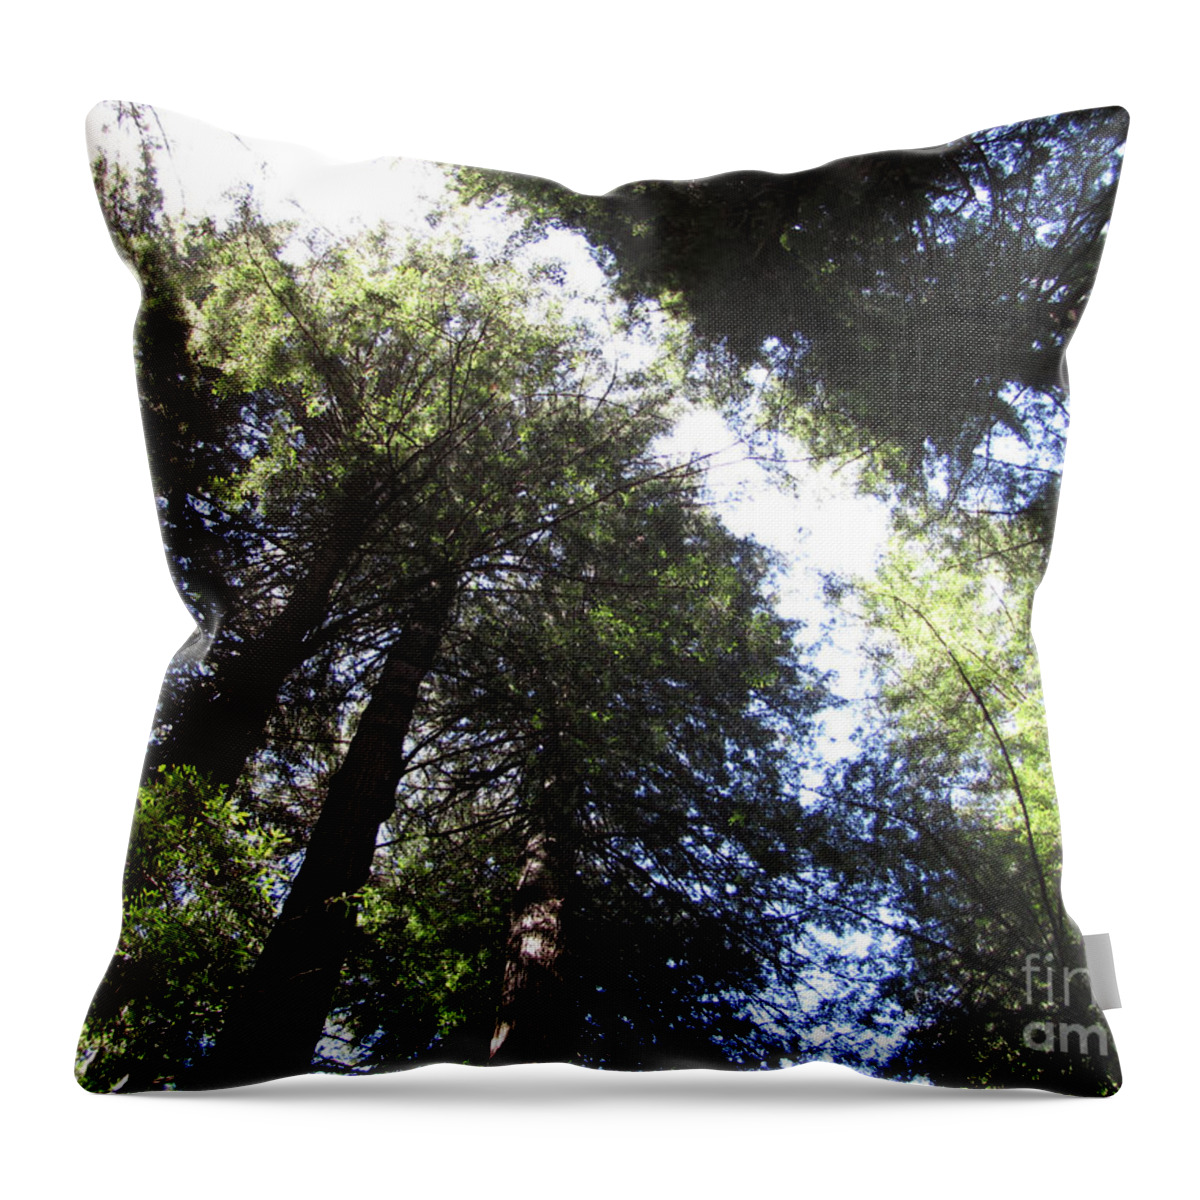 Muir Wood Throw Pillow featuring the photograph Skylight Wisdom by Julia Stubbe